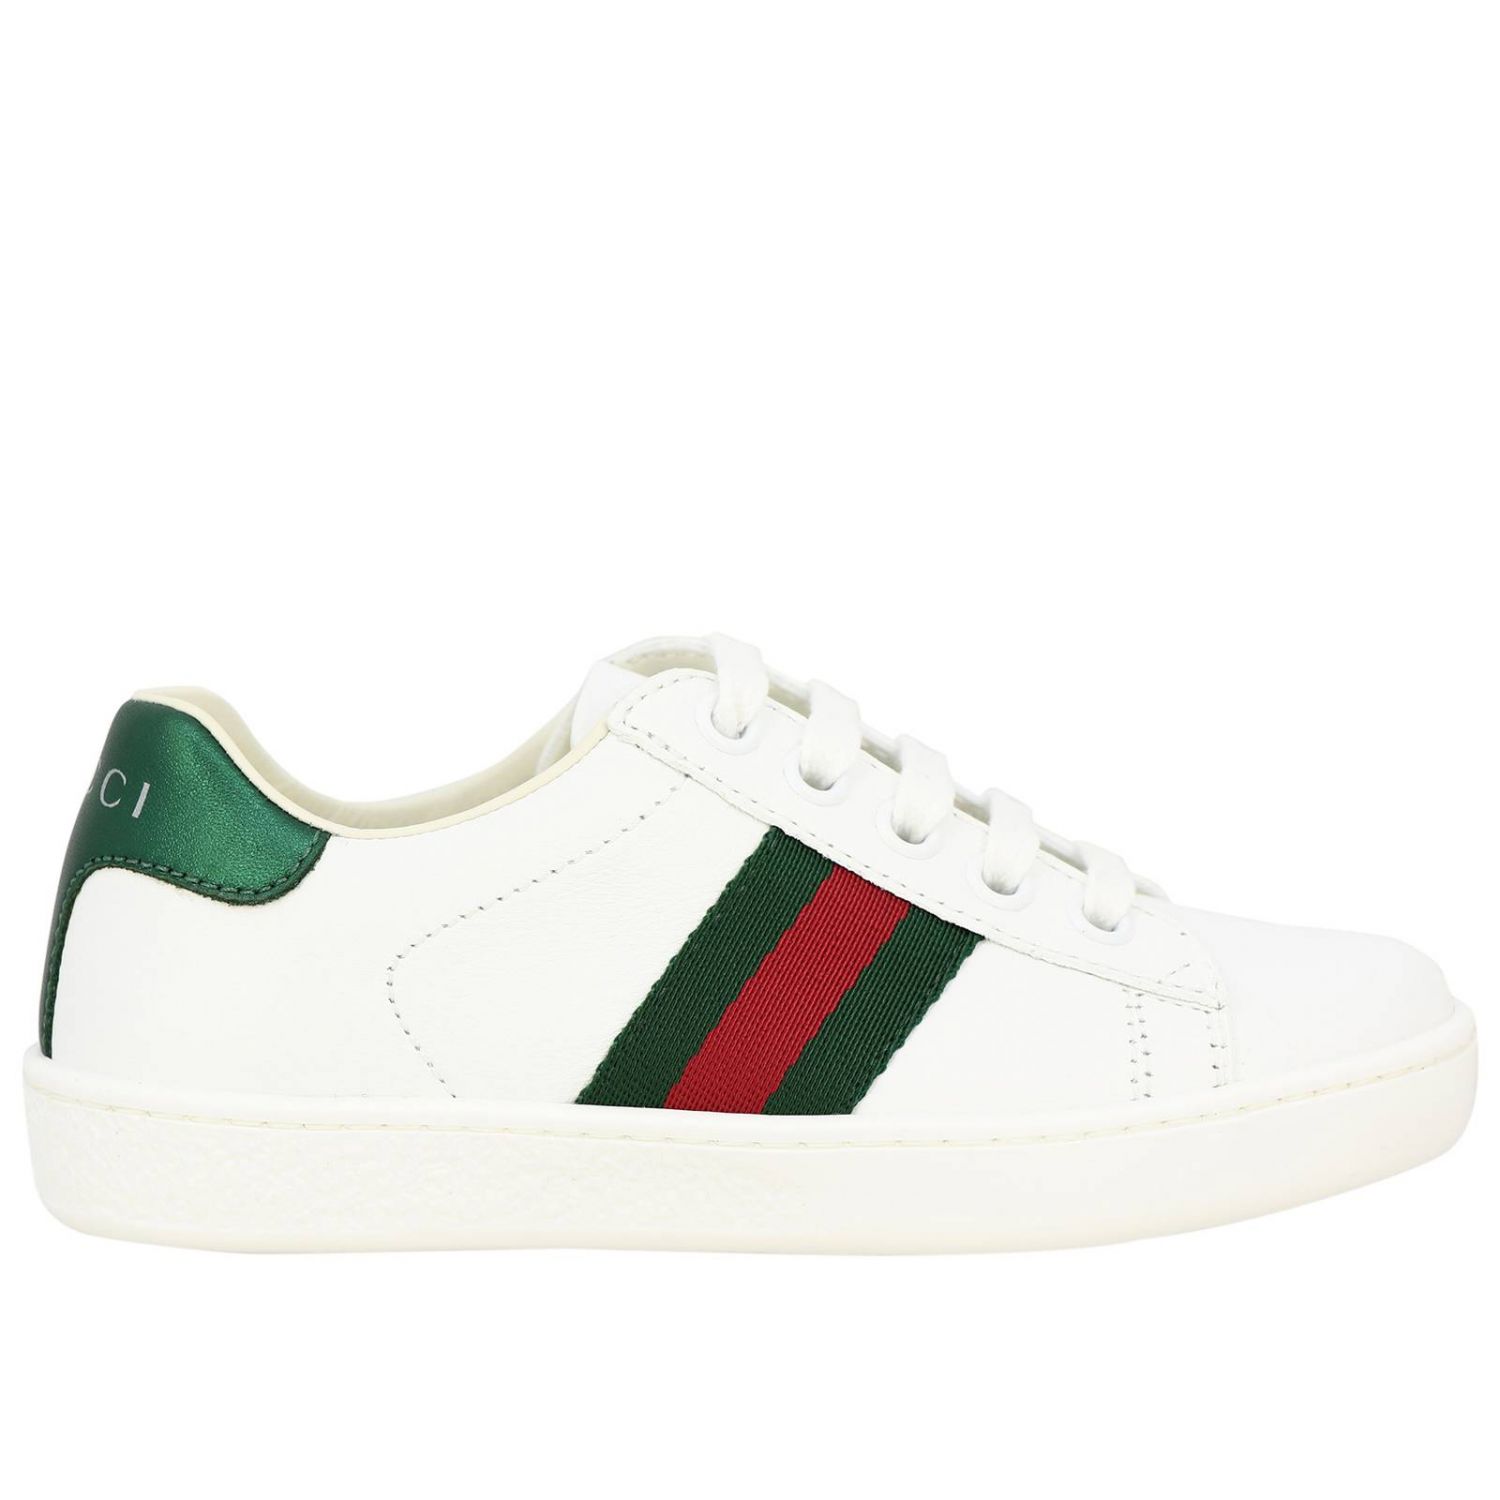 GUCCI: Ace leather up sneakers with Web bands | Shoes Kids White Shoes Gucci 433148 CPWE0 GIGLIO.COM